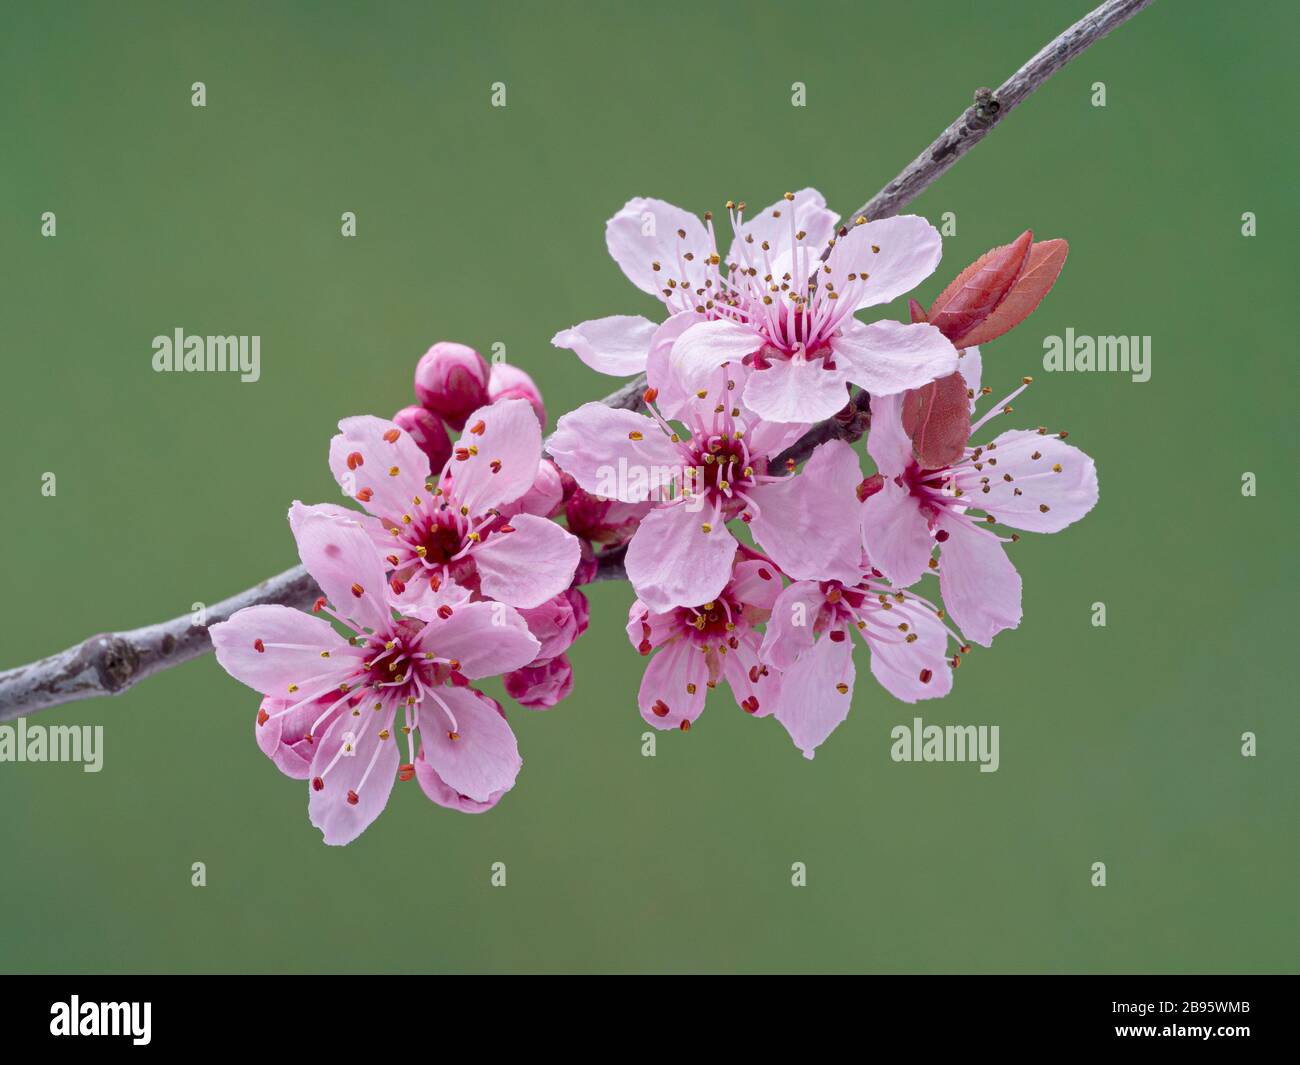 Closeup of the spring blossoms of a plum tree (Prunus species) blooming in Ladner, Delta, British Columbia, Canada Stock Photo